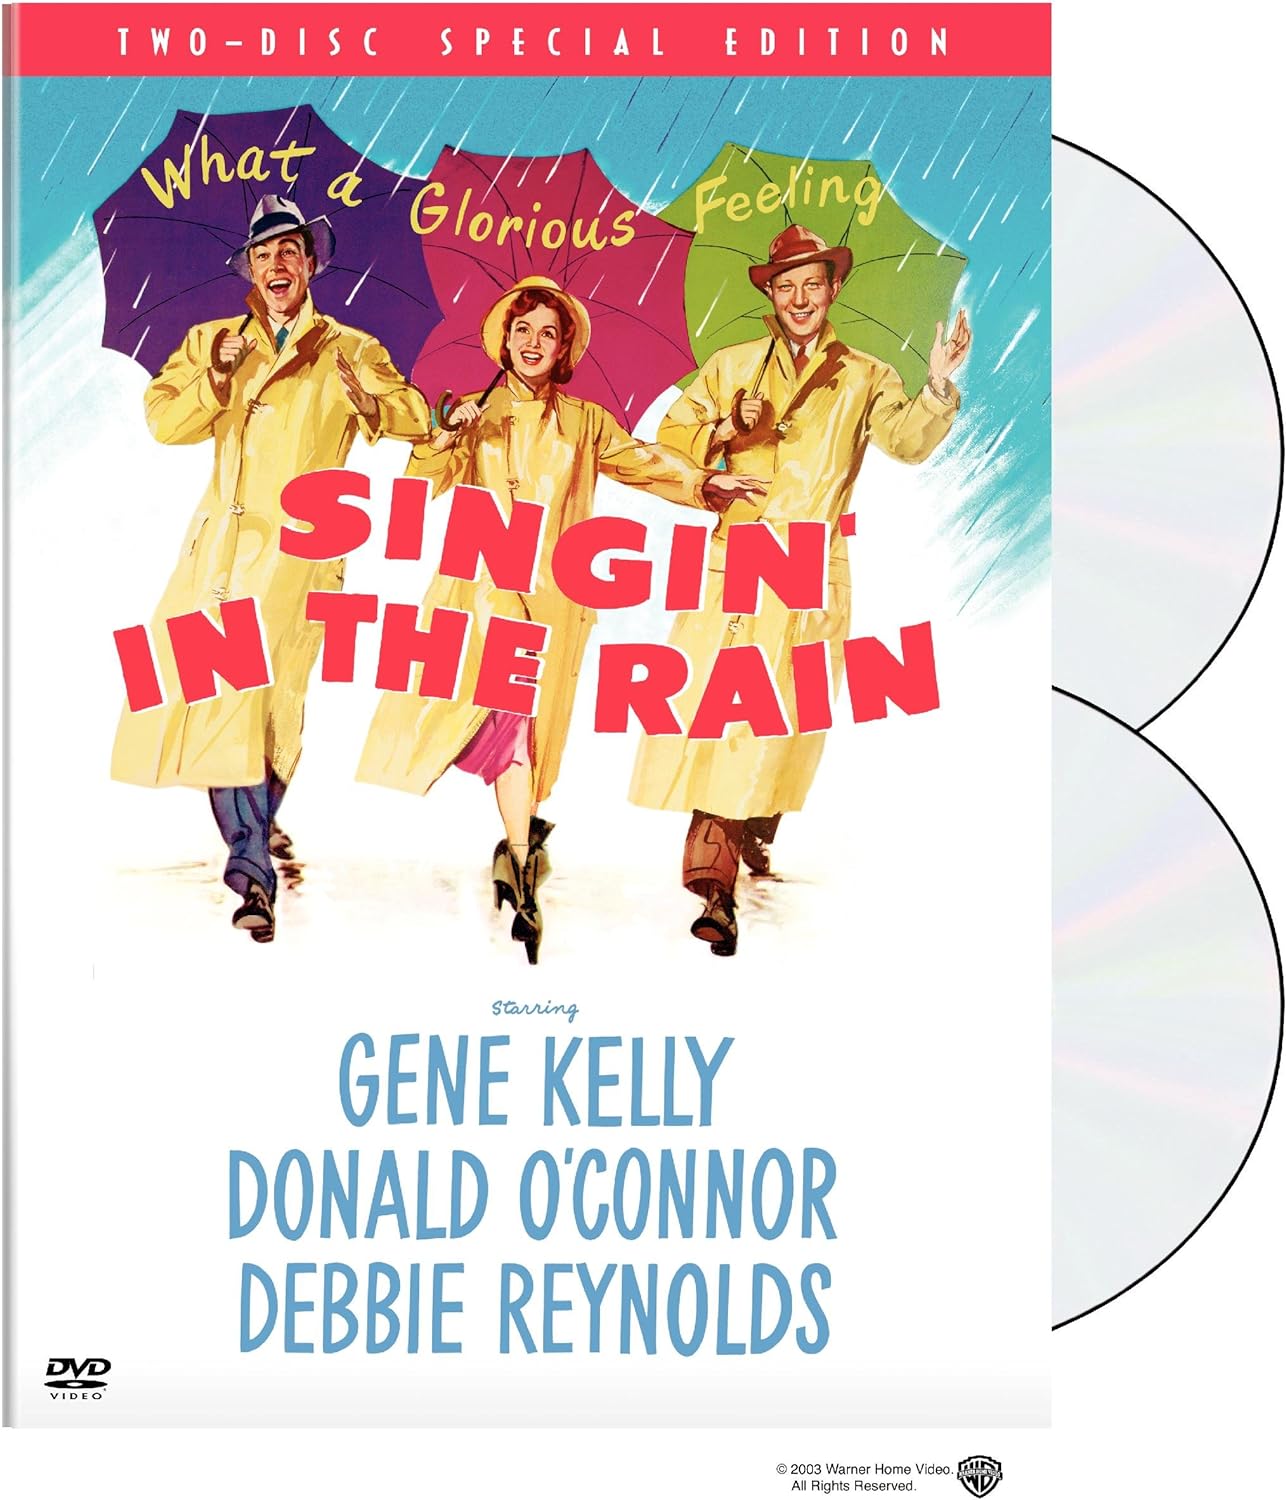 Siging in the Rain 2 Disc Special